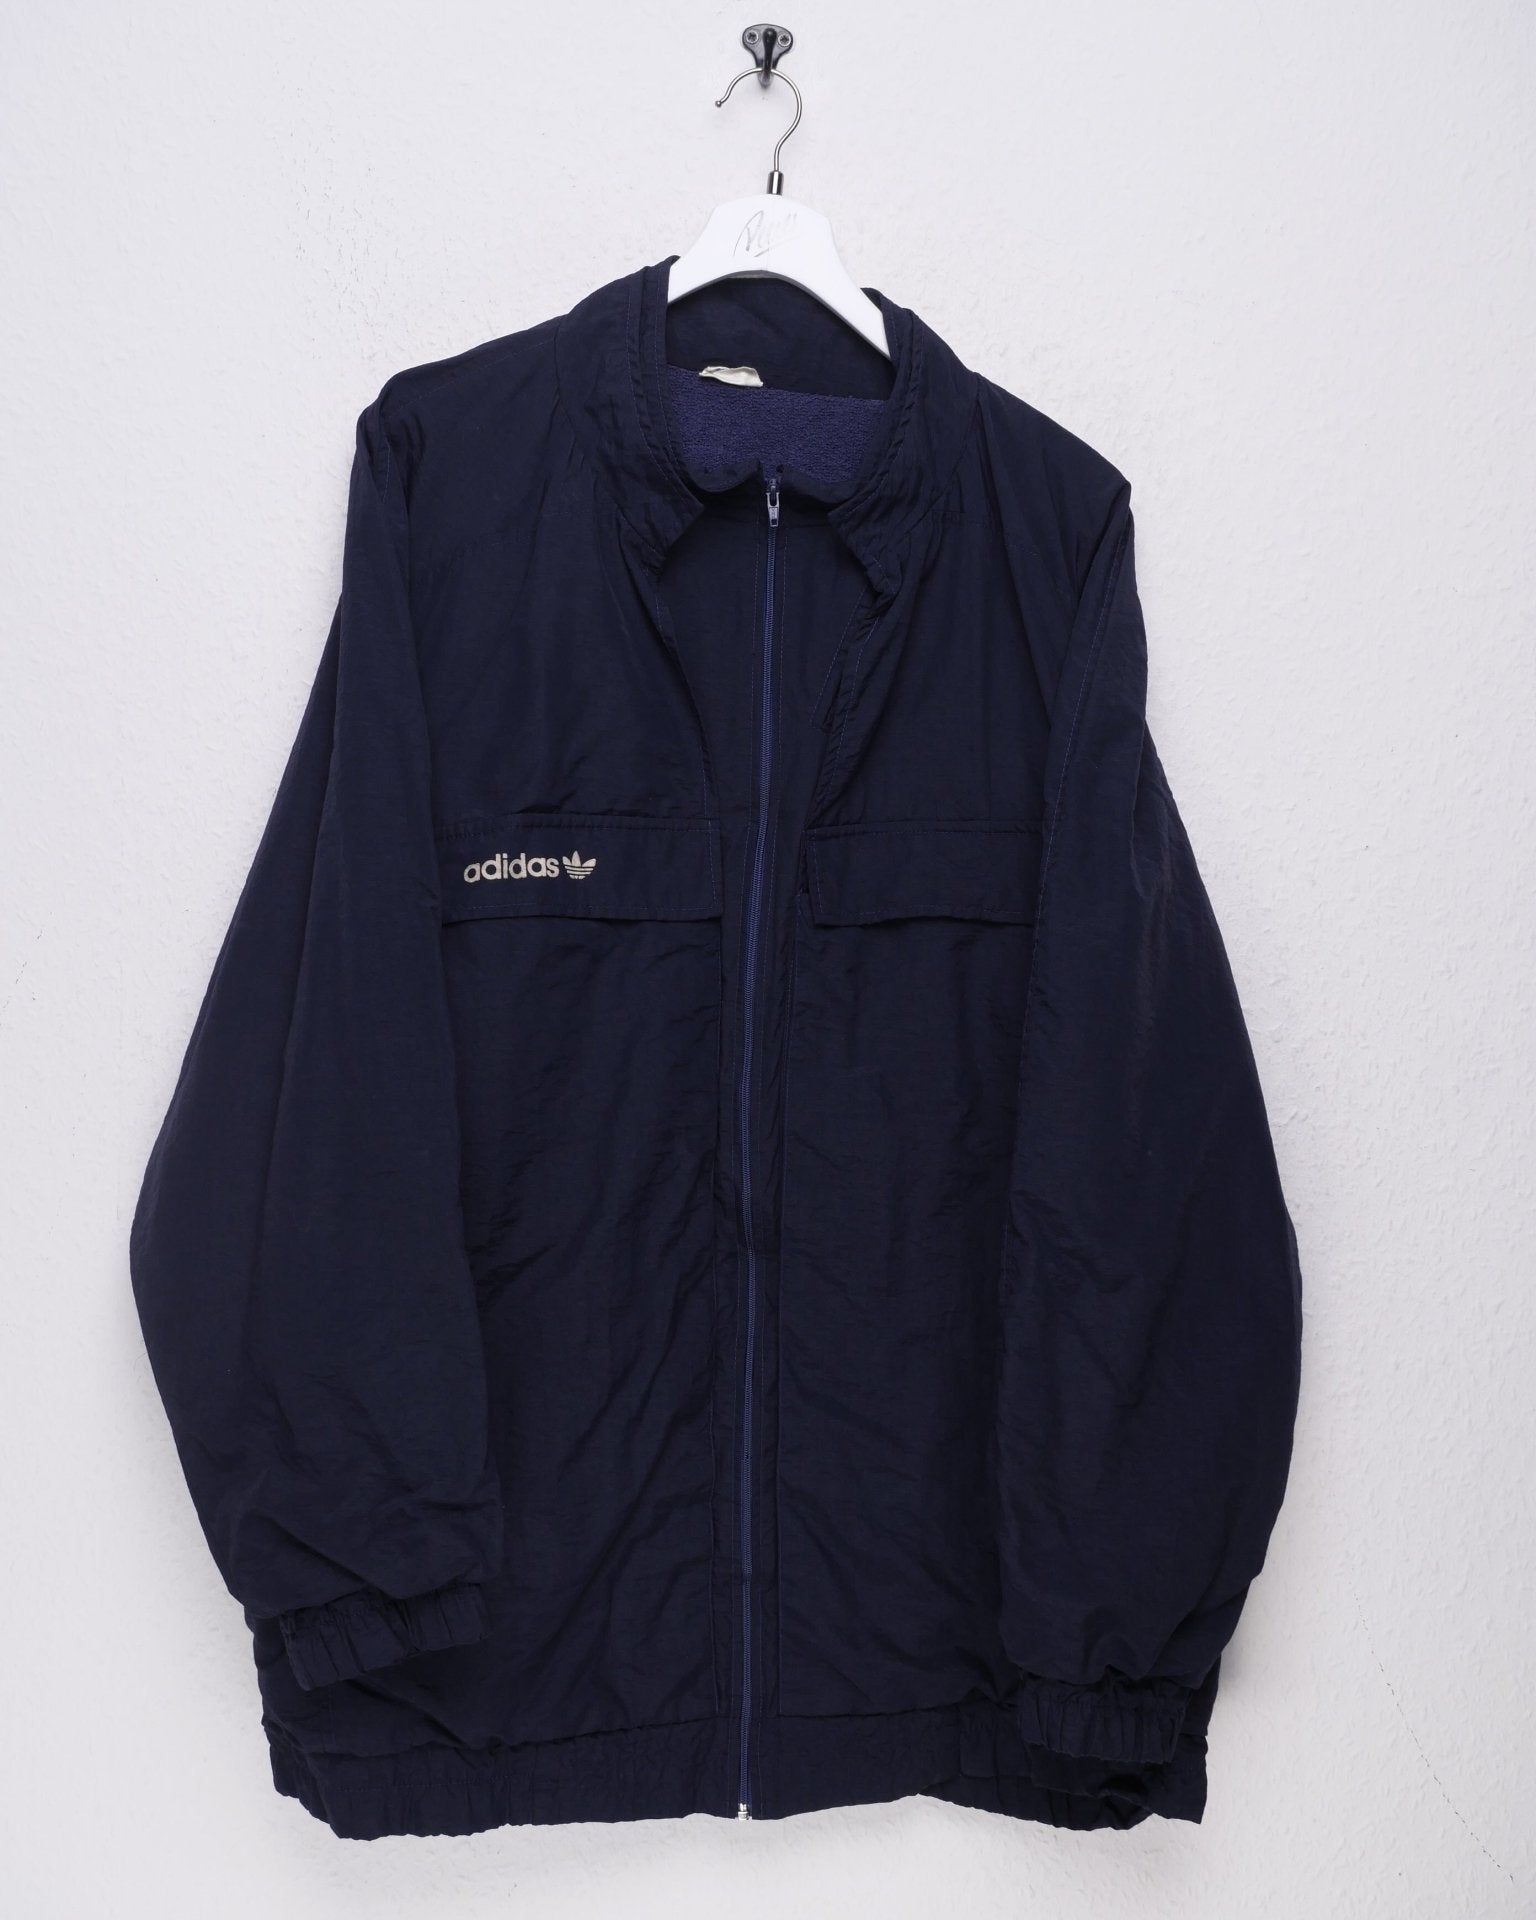 Adidas embroidered Logo navy thick Track Jacket - Peeces